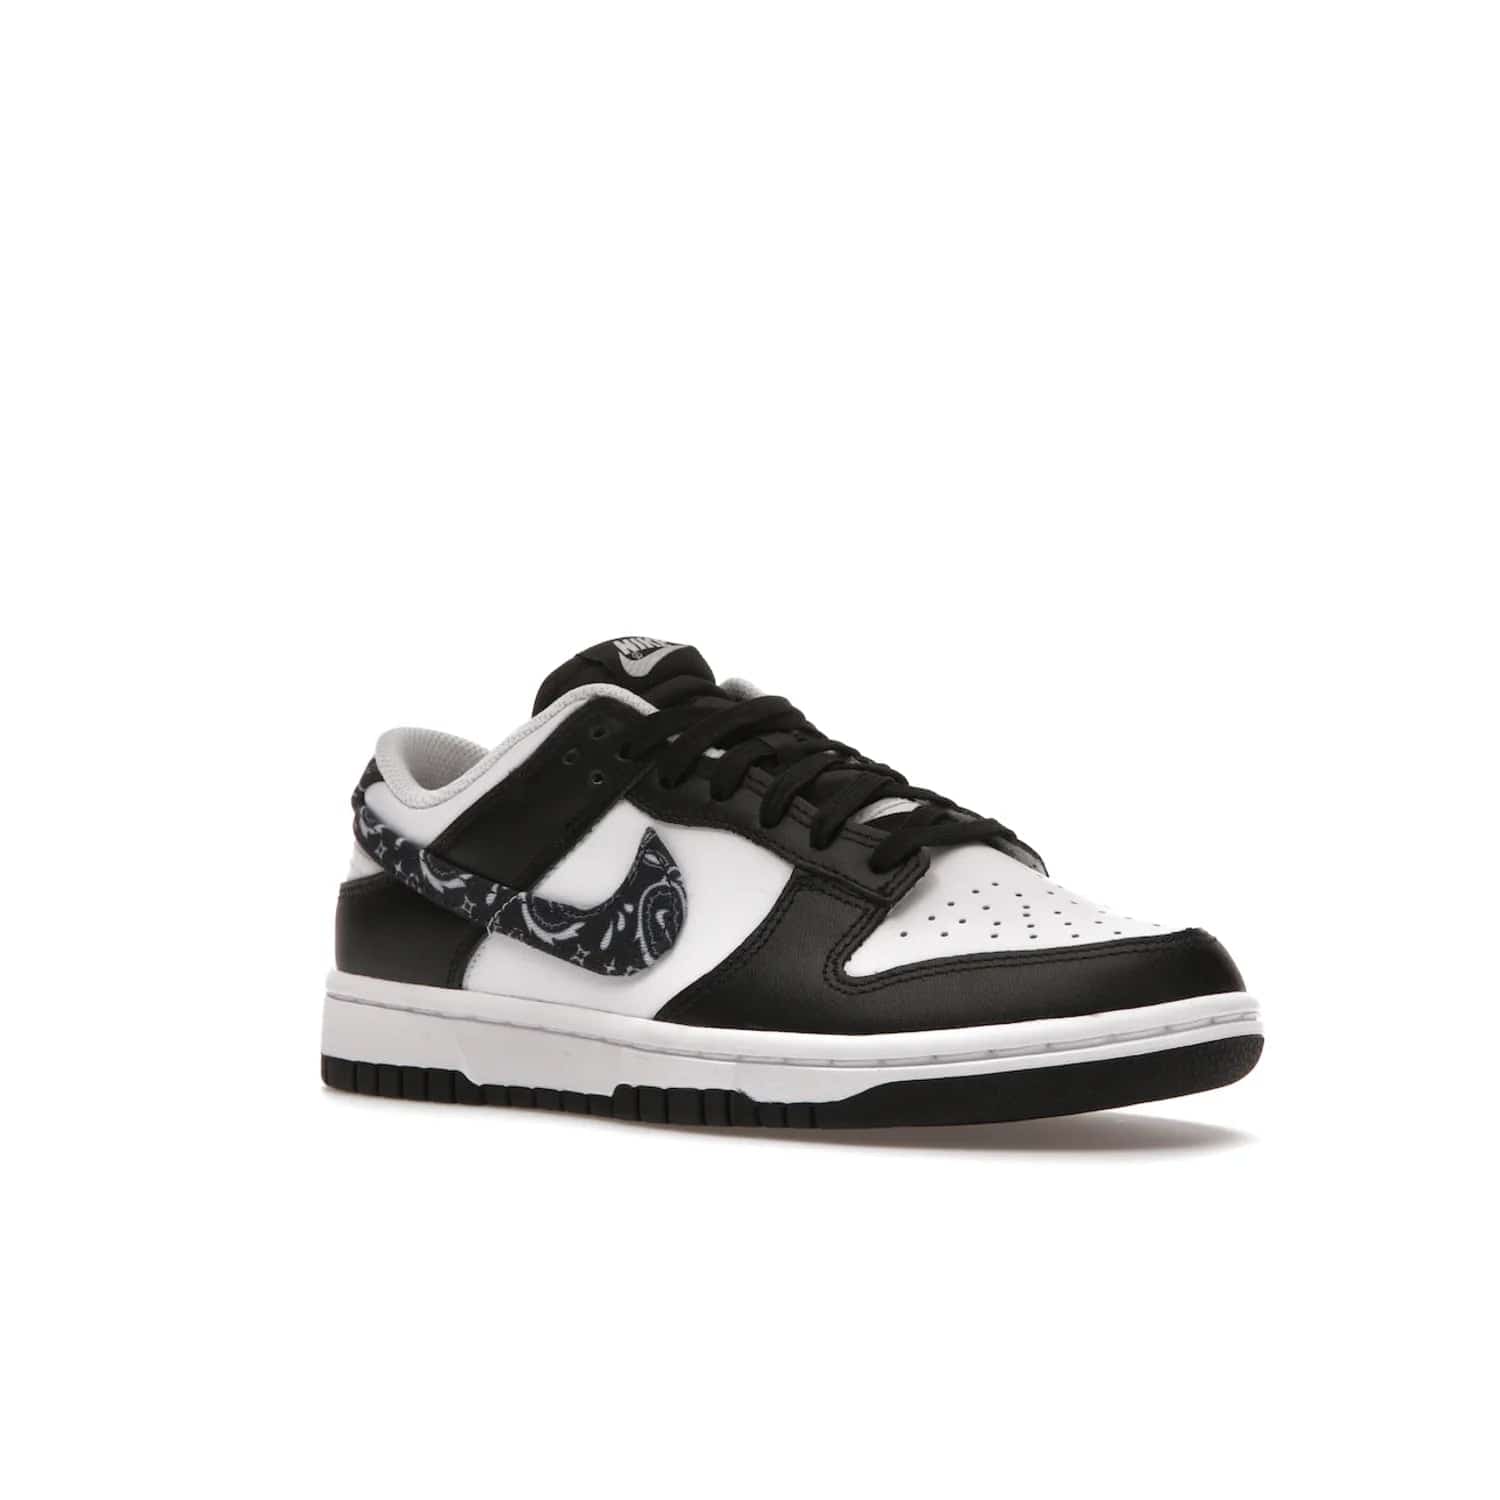 Nike Dunk Low Essential Paisley Pack Black (Women's) - Image 5 - Only at www.BallersClubKickz.com - Make a statement with the all-black Nike Dunk Low Essential Paisley Pack Black (Women's) featuring white leather overlays, a stunning paisley bandana print, and a white midsole for comfort and optimal grip on any surface.